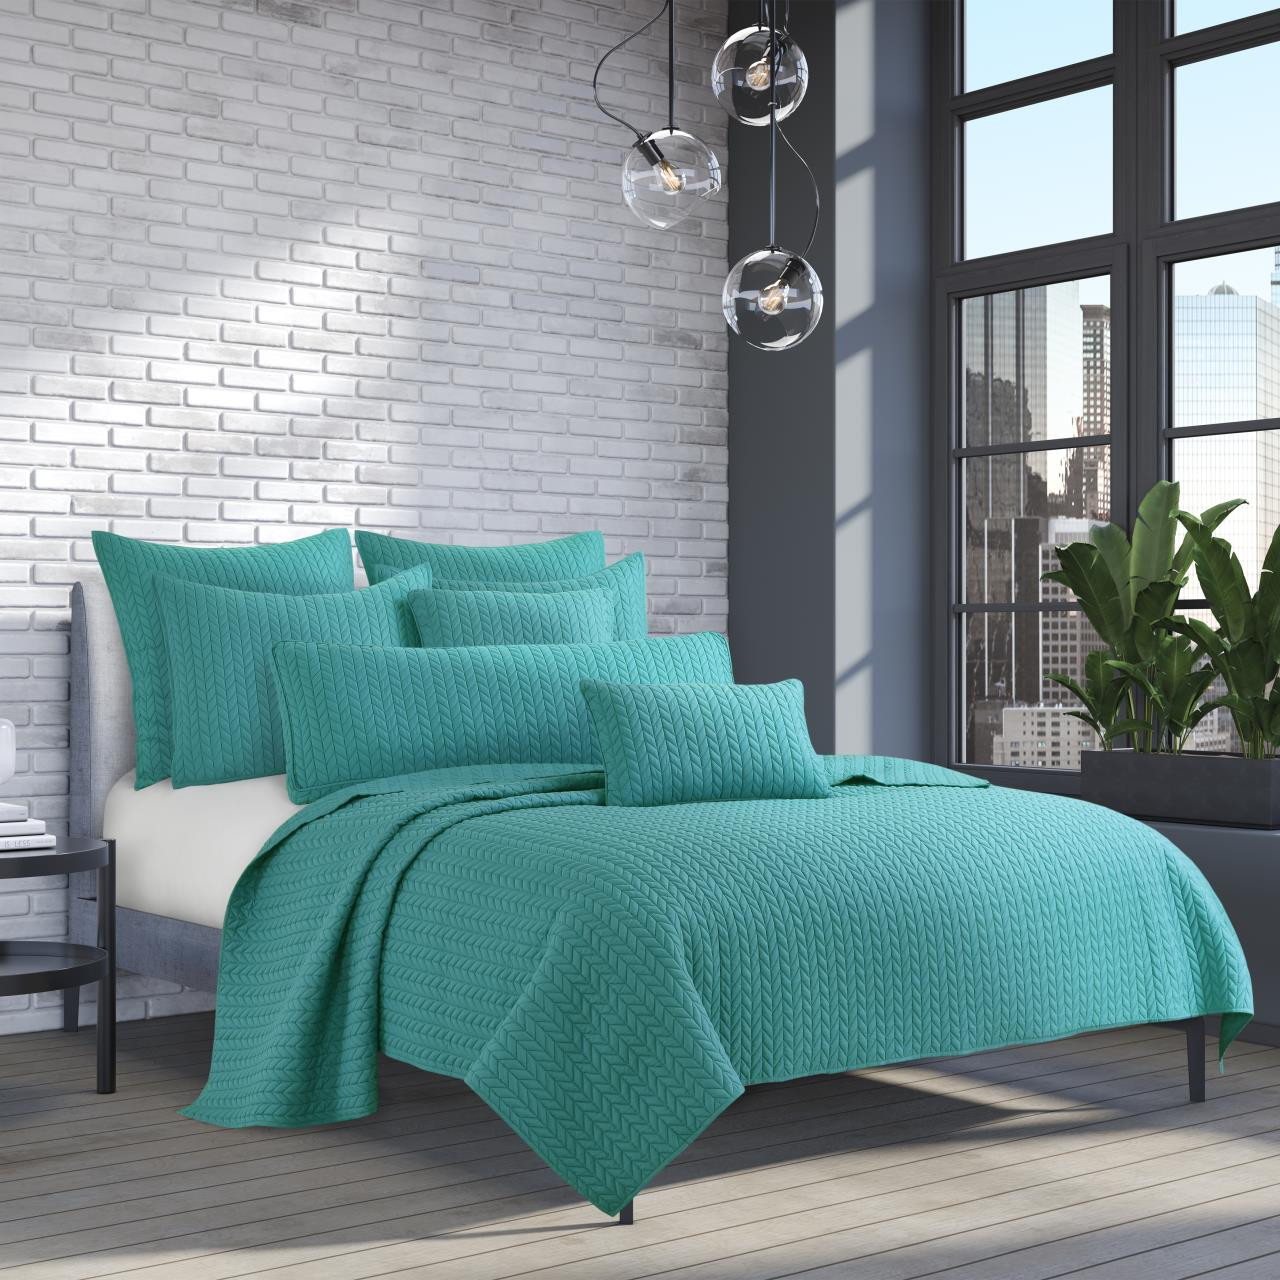 Cayman Turquoise Quilt Collection -